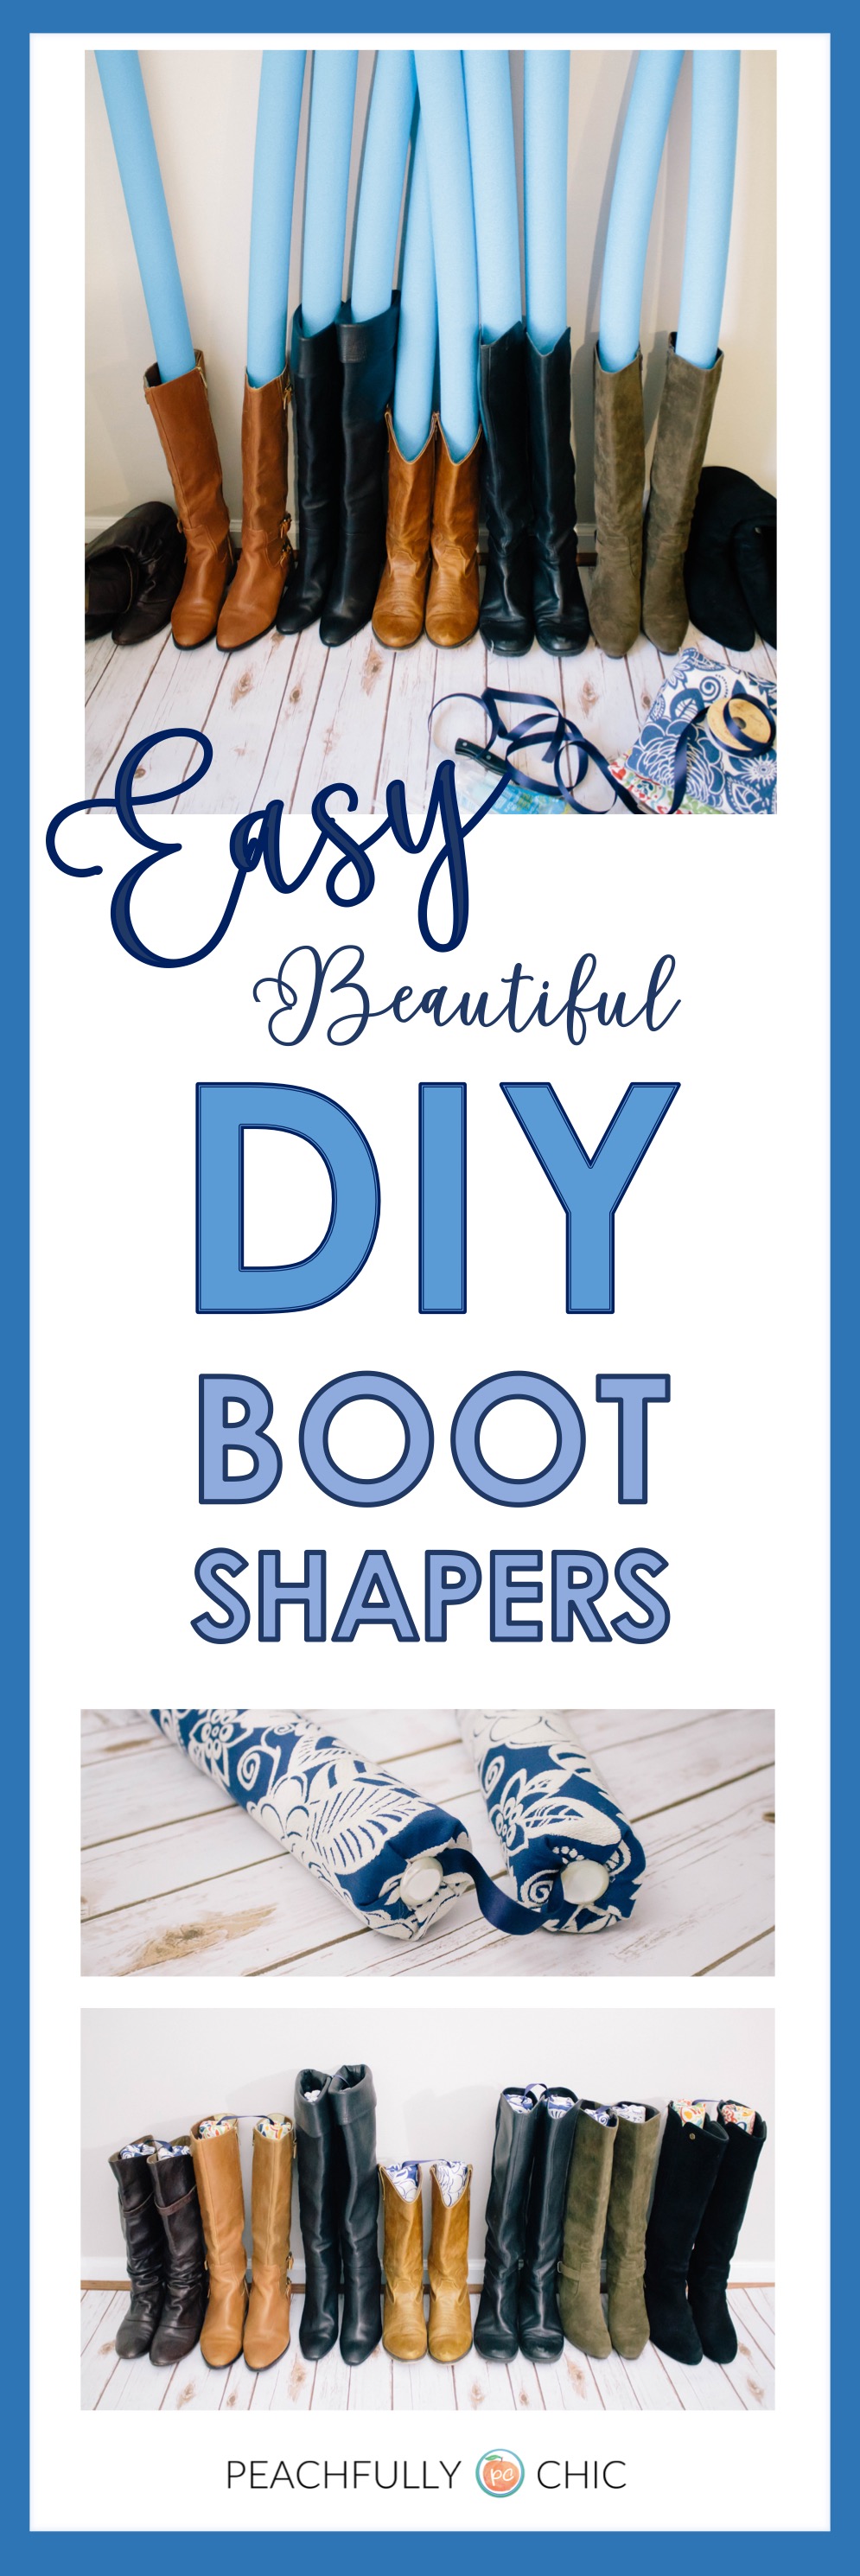 9 DIY Boot Shapers ideas  boot shaper, shapers, boots